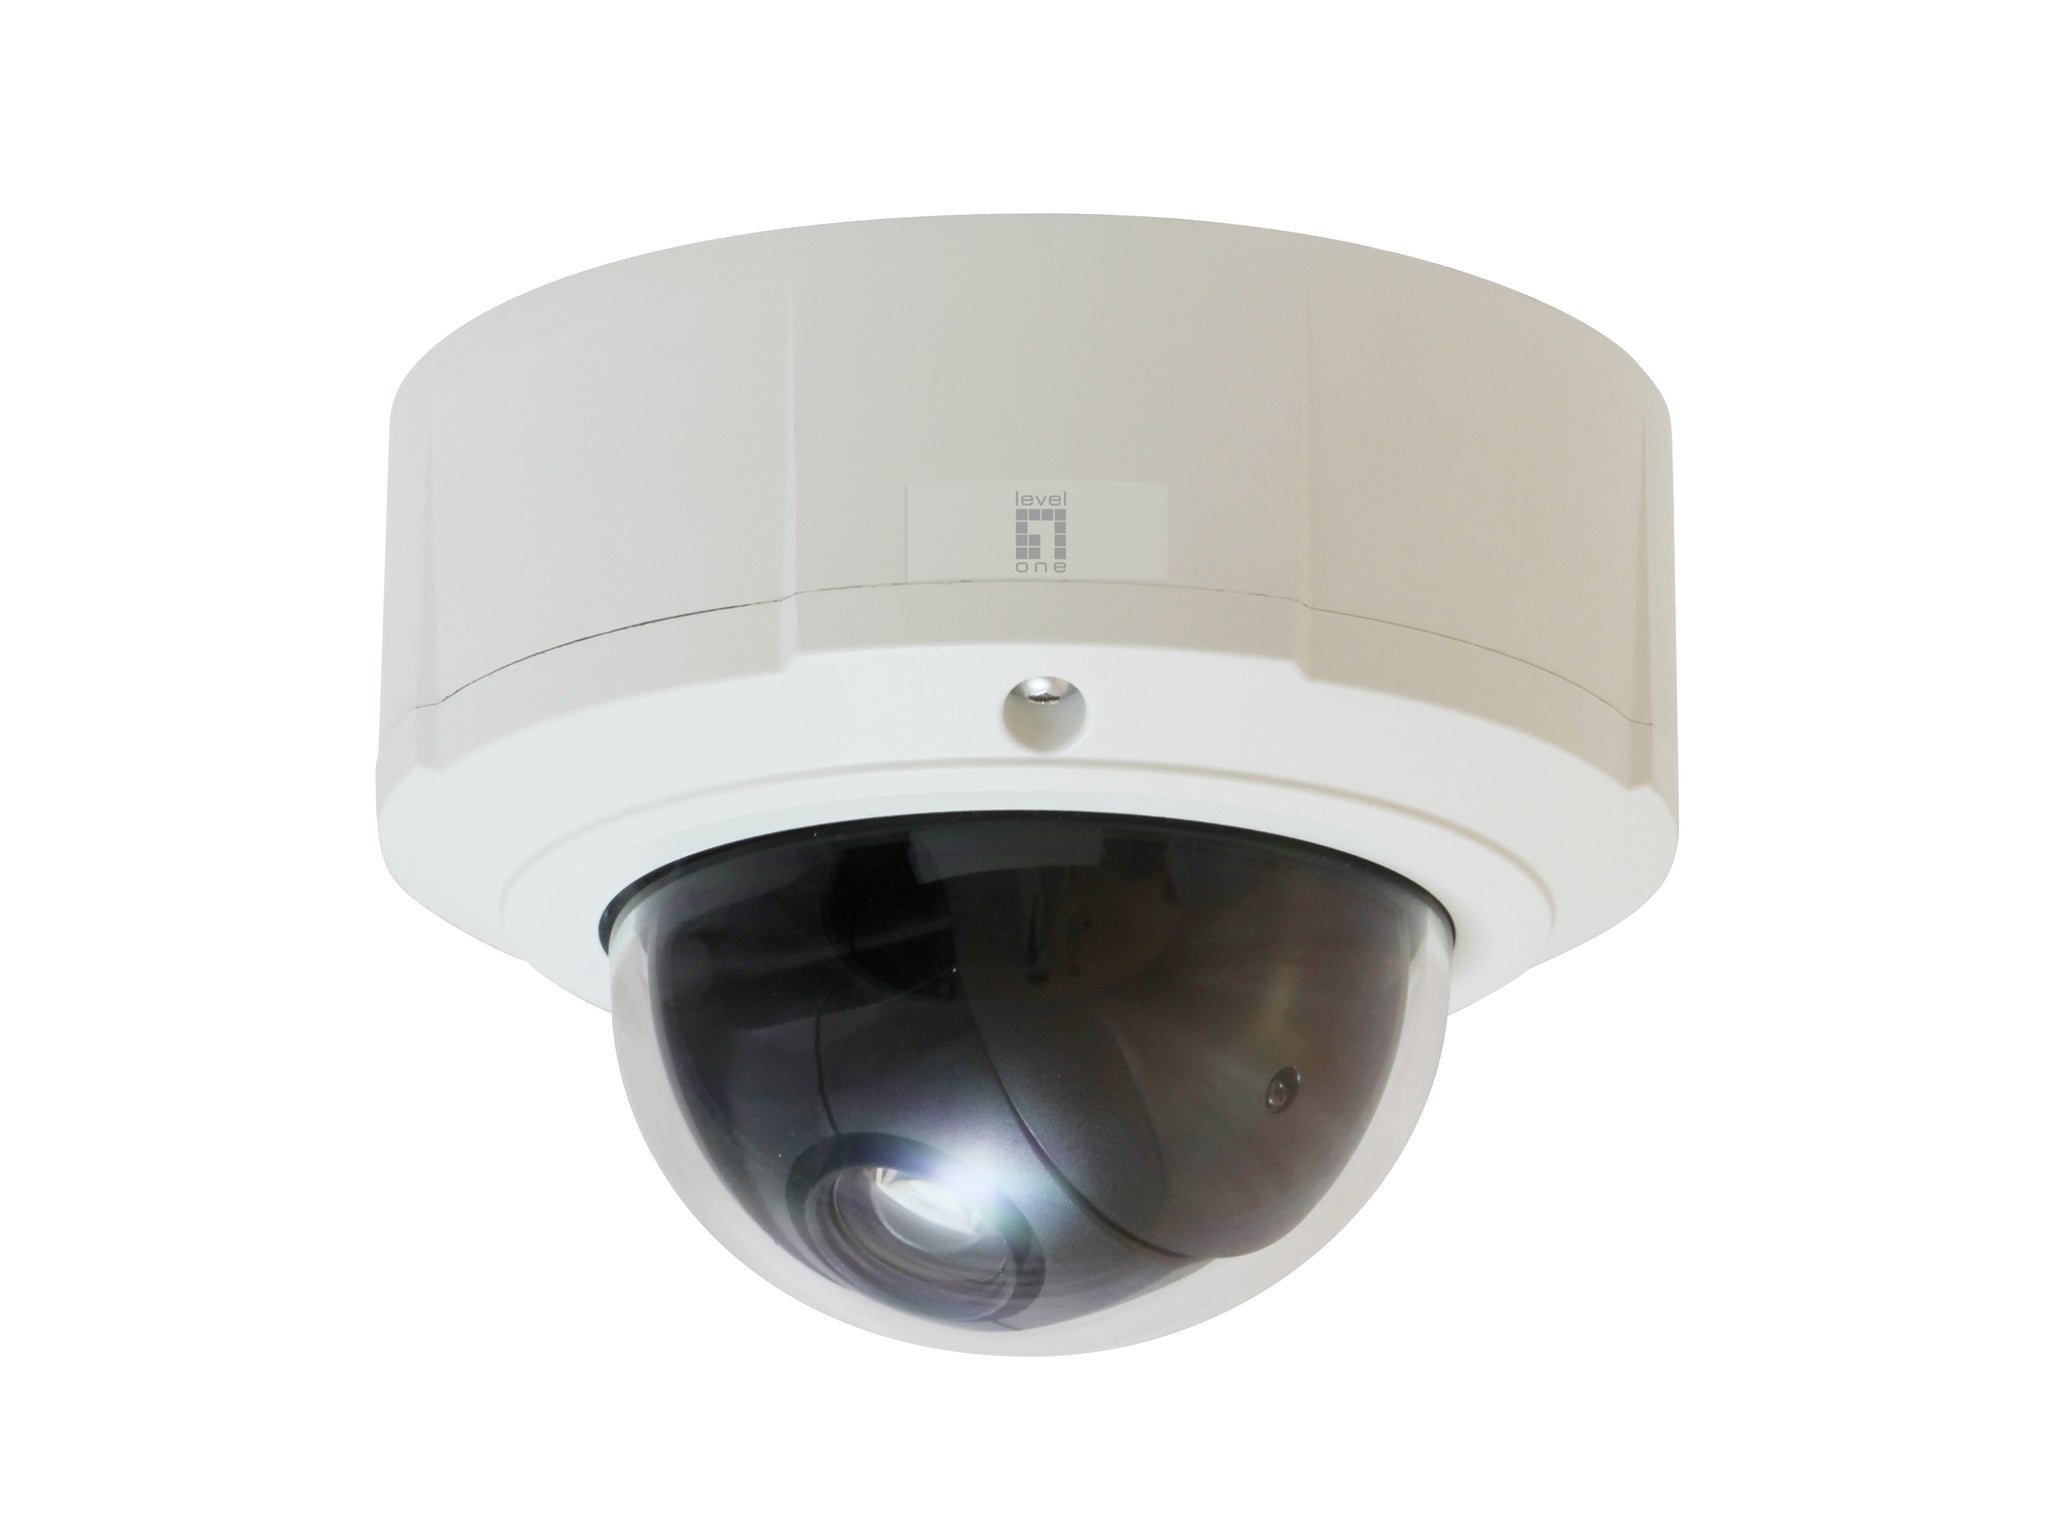 FCS-4044 PTZ Dome Outdoor Network Camera, 5MP, 802.3af PoE, 10x Optical Zoom, WDR